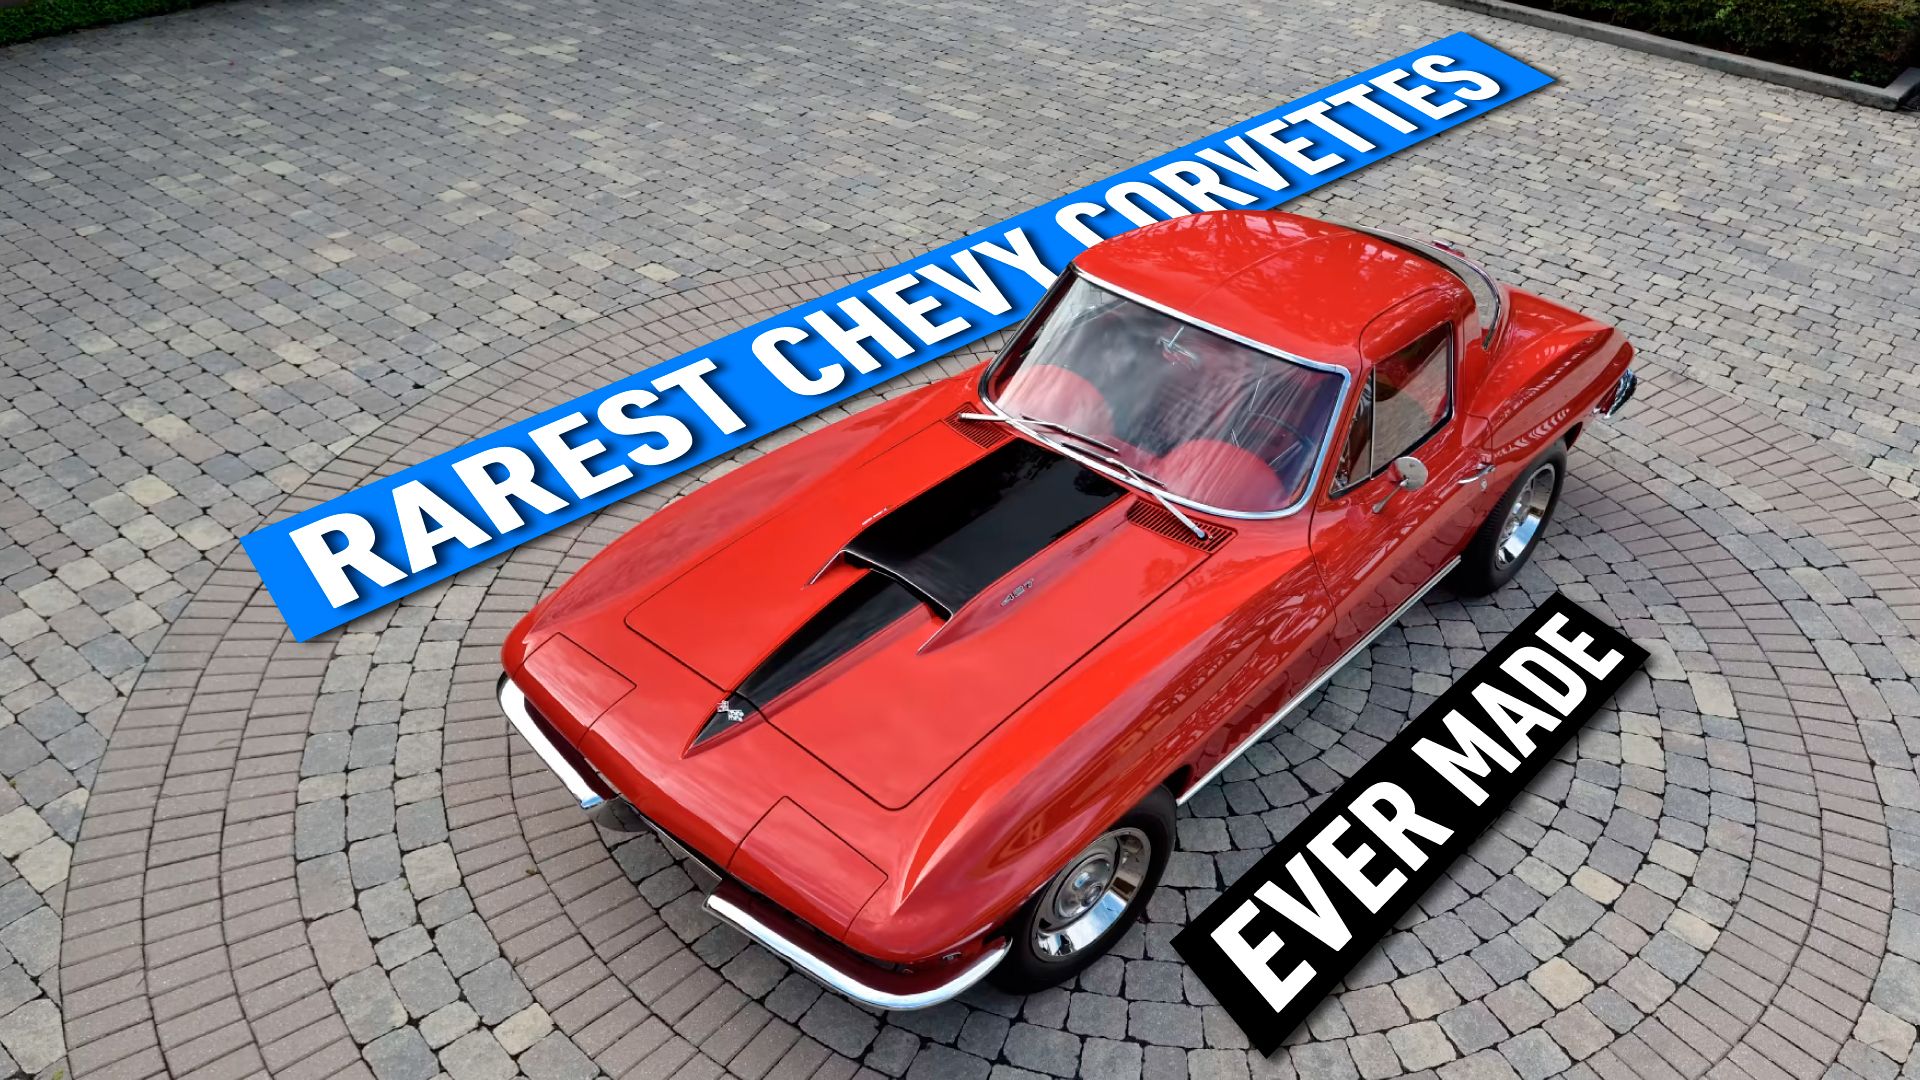 most expensive chevy corvette ever sold at auction